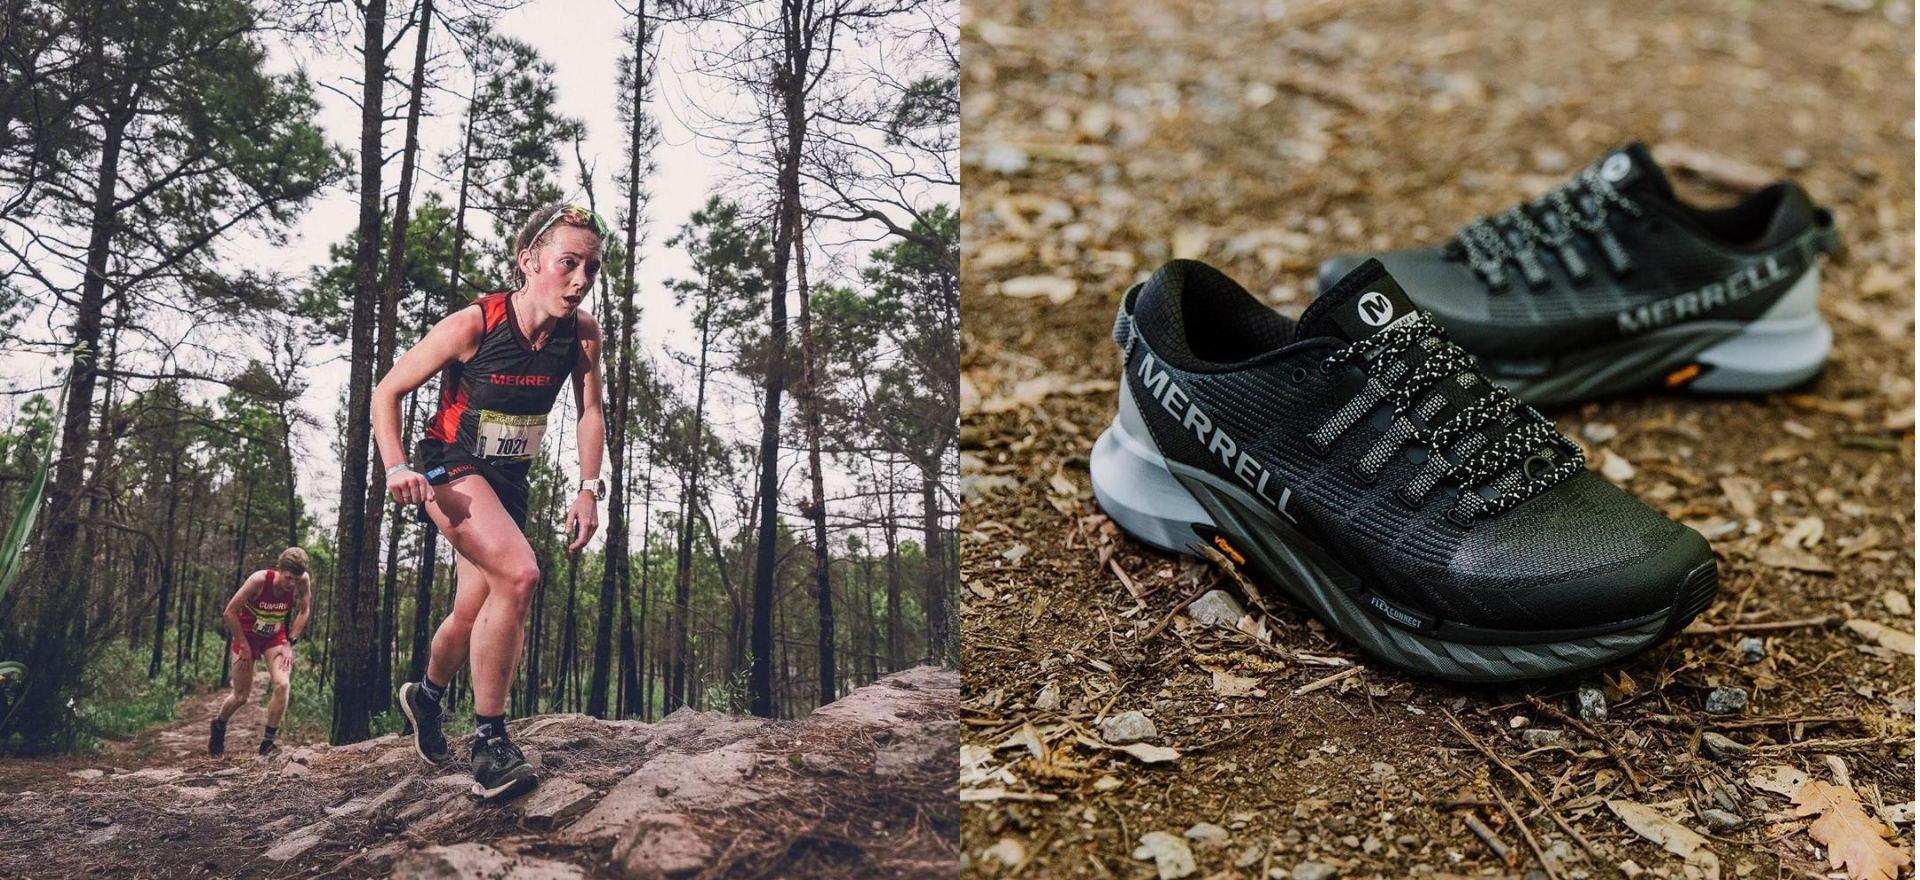 Aroo! Get Ready To Embark On An Adventure in Baguio with Merrell and Spartan Trail